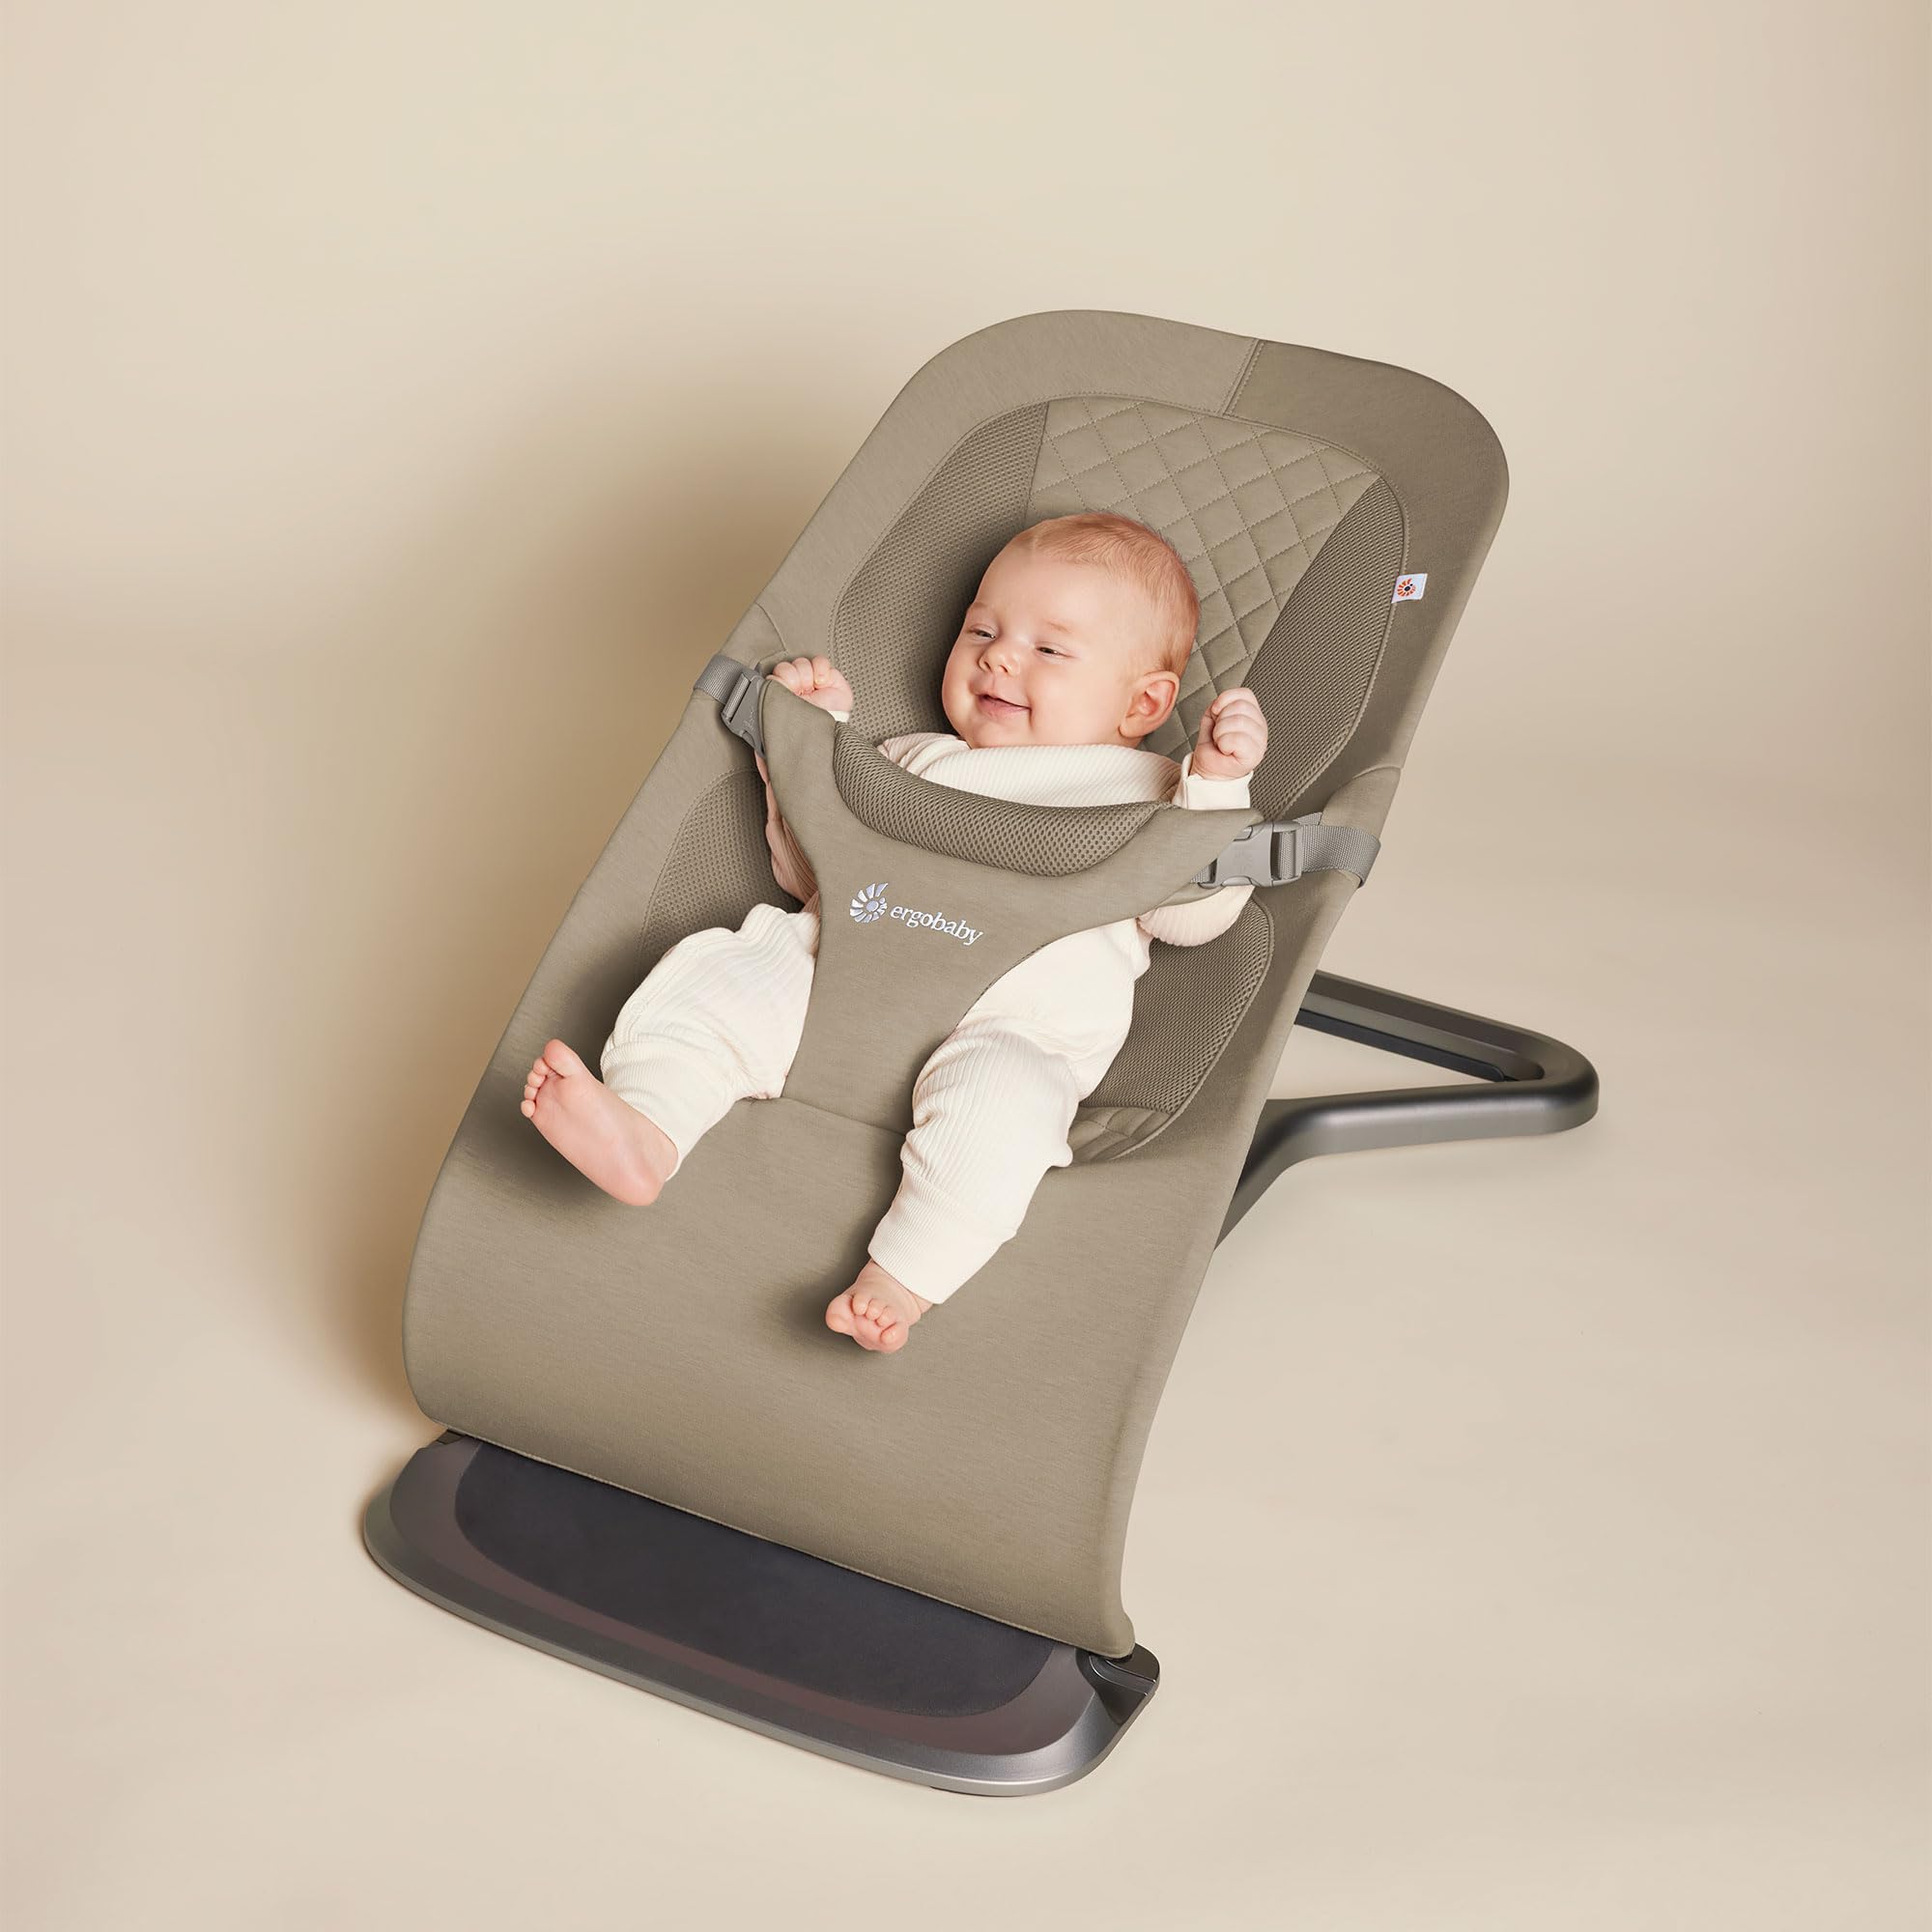 Ergobaby Evolve 3-in-1 Bouncer, Adjustable Multi Position Baby Bouncer Seat, Fits Newborn to Toddler, Soft Olive